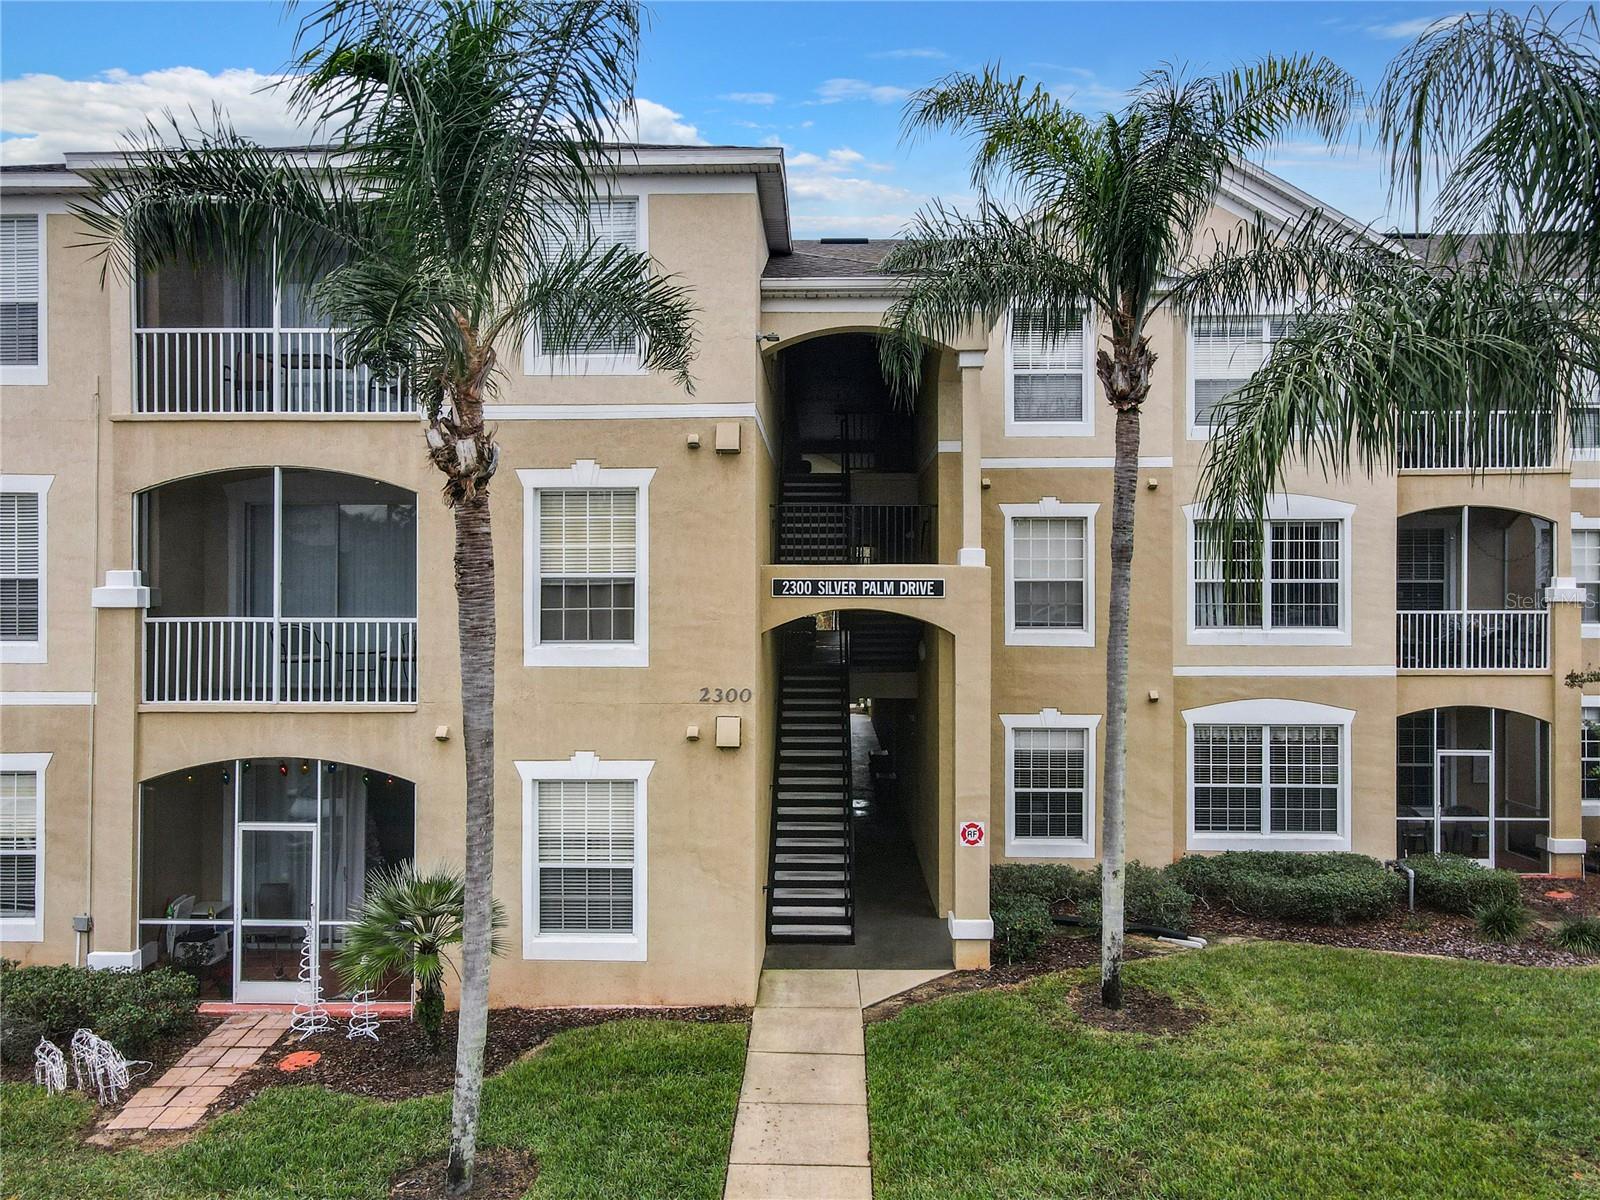 Photo of 2300 SILVER PALM DRIVE, KISSIMMEE, FL 34747